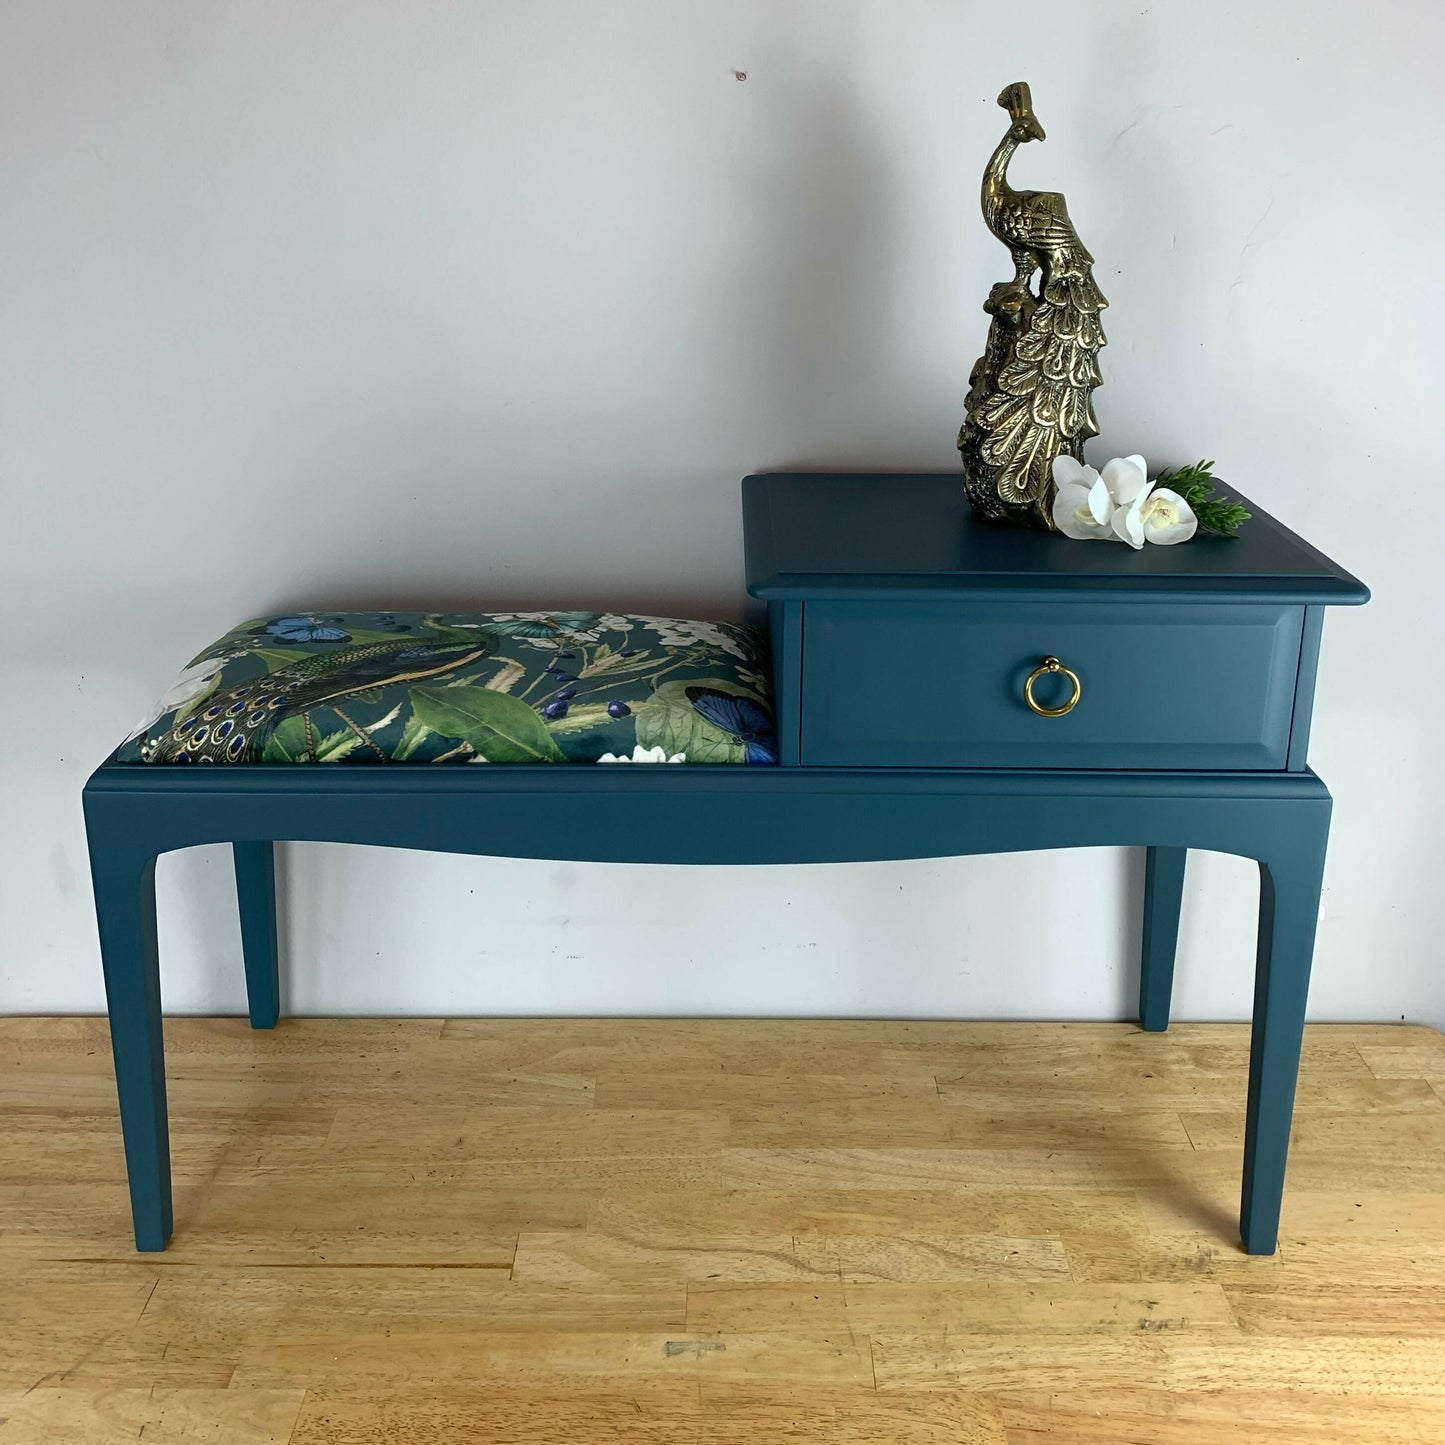 Sold - Stag telephone table, entryway table with seat, hallway seat